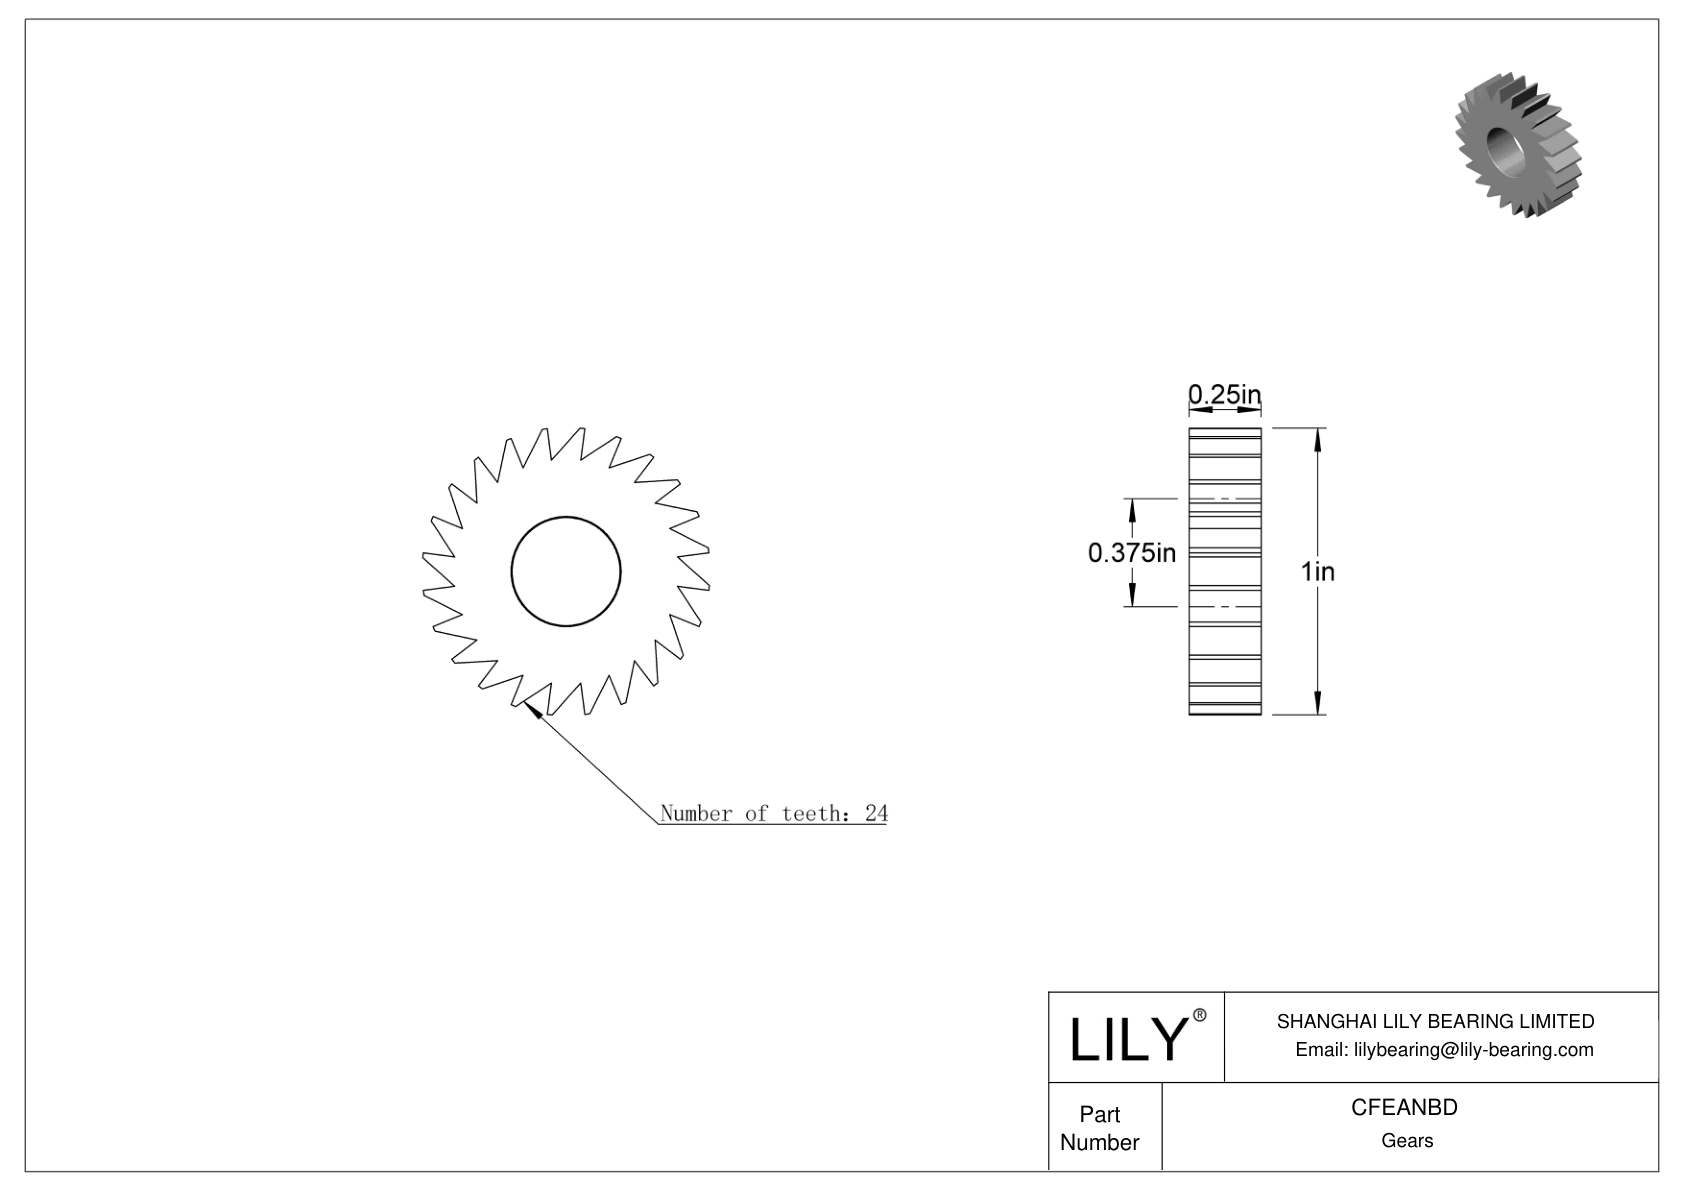 CFEANBD Gears cad drawing